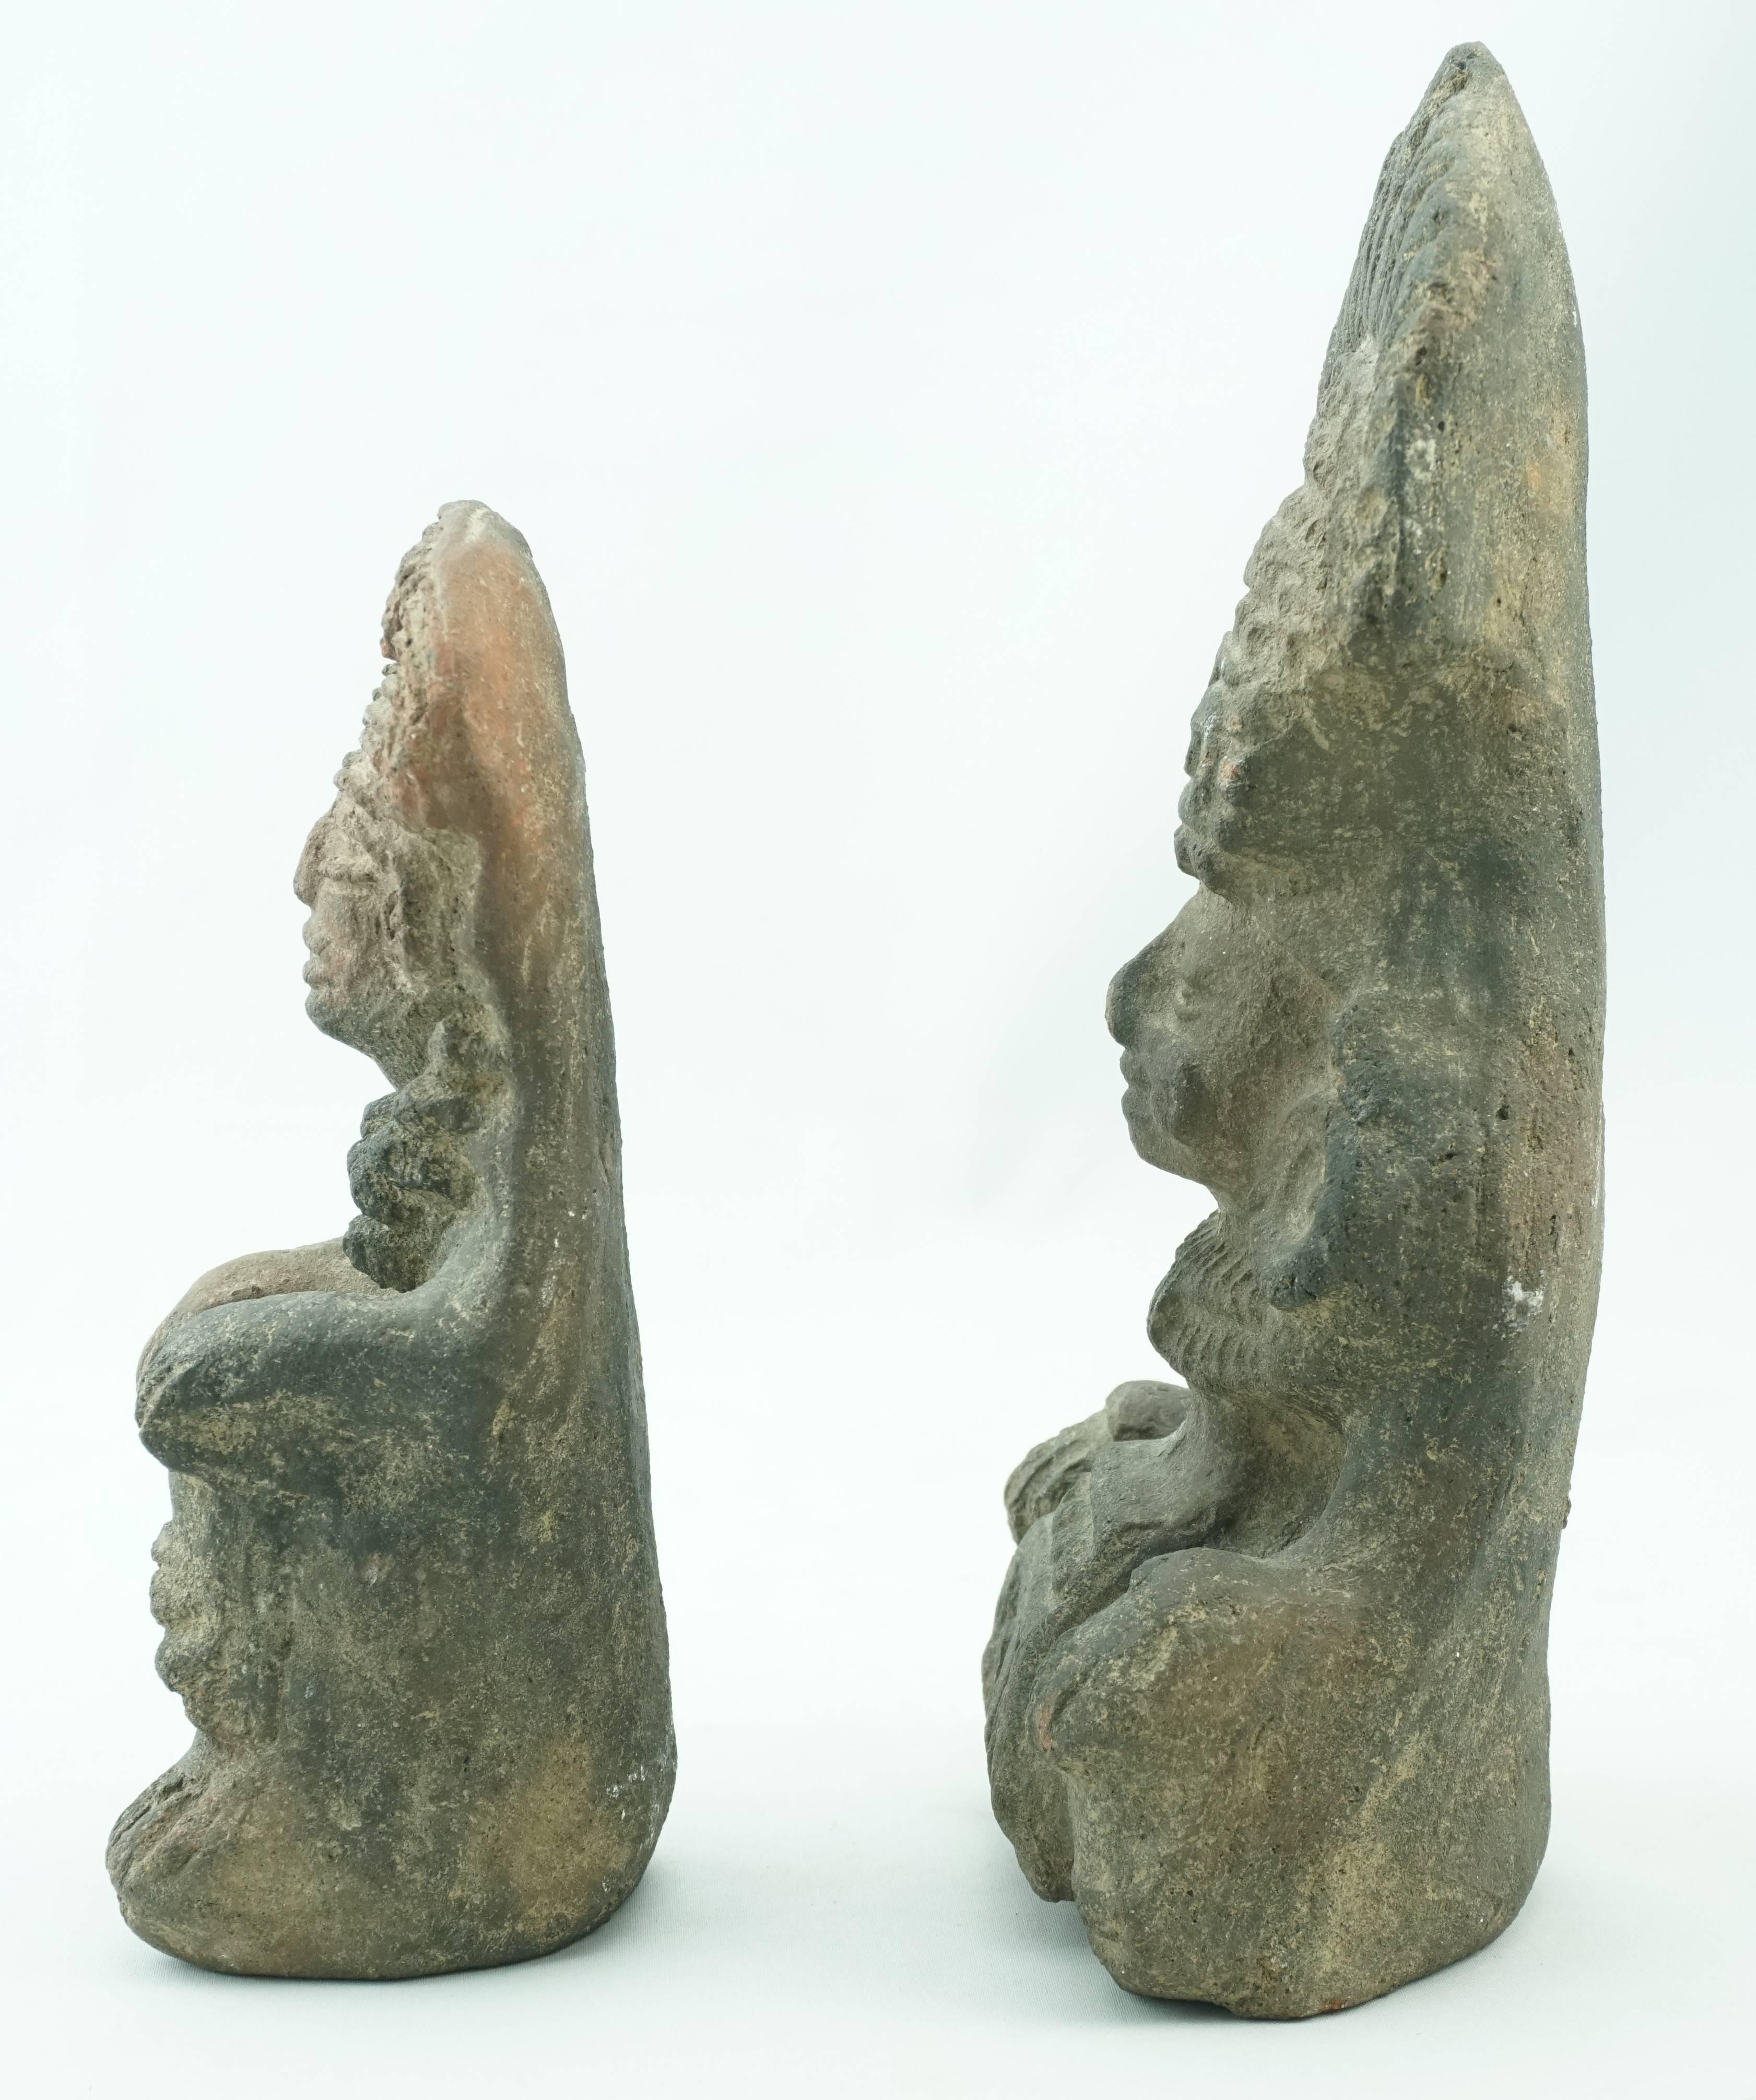 Two pre Colombian carved volcanic stone figures with headdress, circa 1100 AD-1450 AD. Made of Basalt volcanic rock and hand-carved depicting Gods or Royalty in ceremonial head dresses.

Dimensions: Largest: 8 inches tall, 3.9 inches wide, 2.5